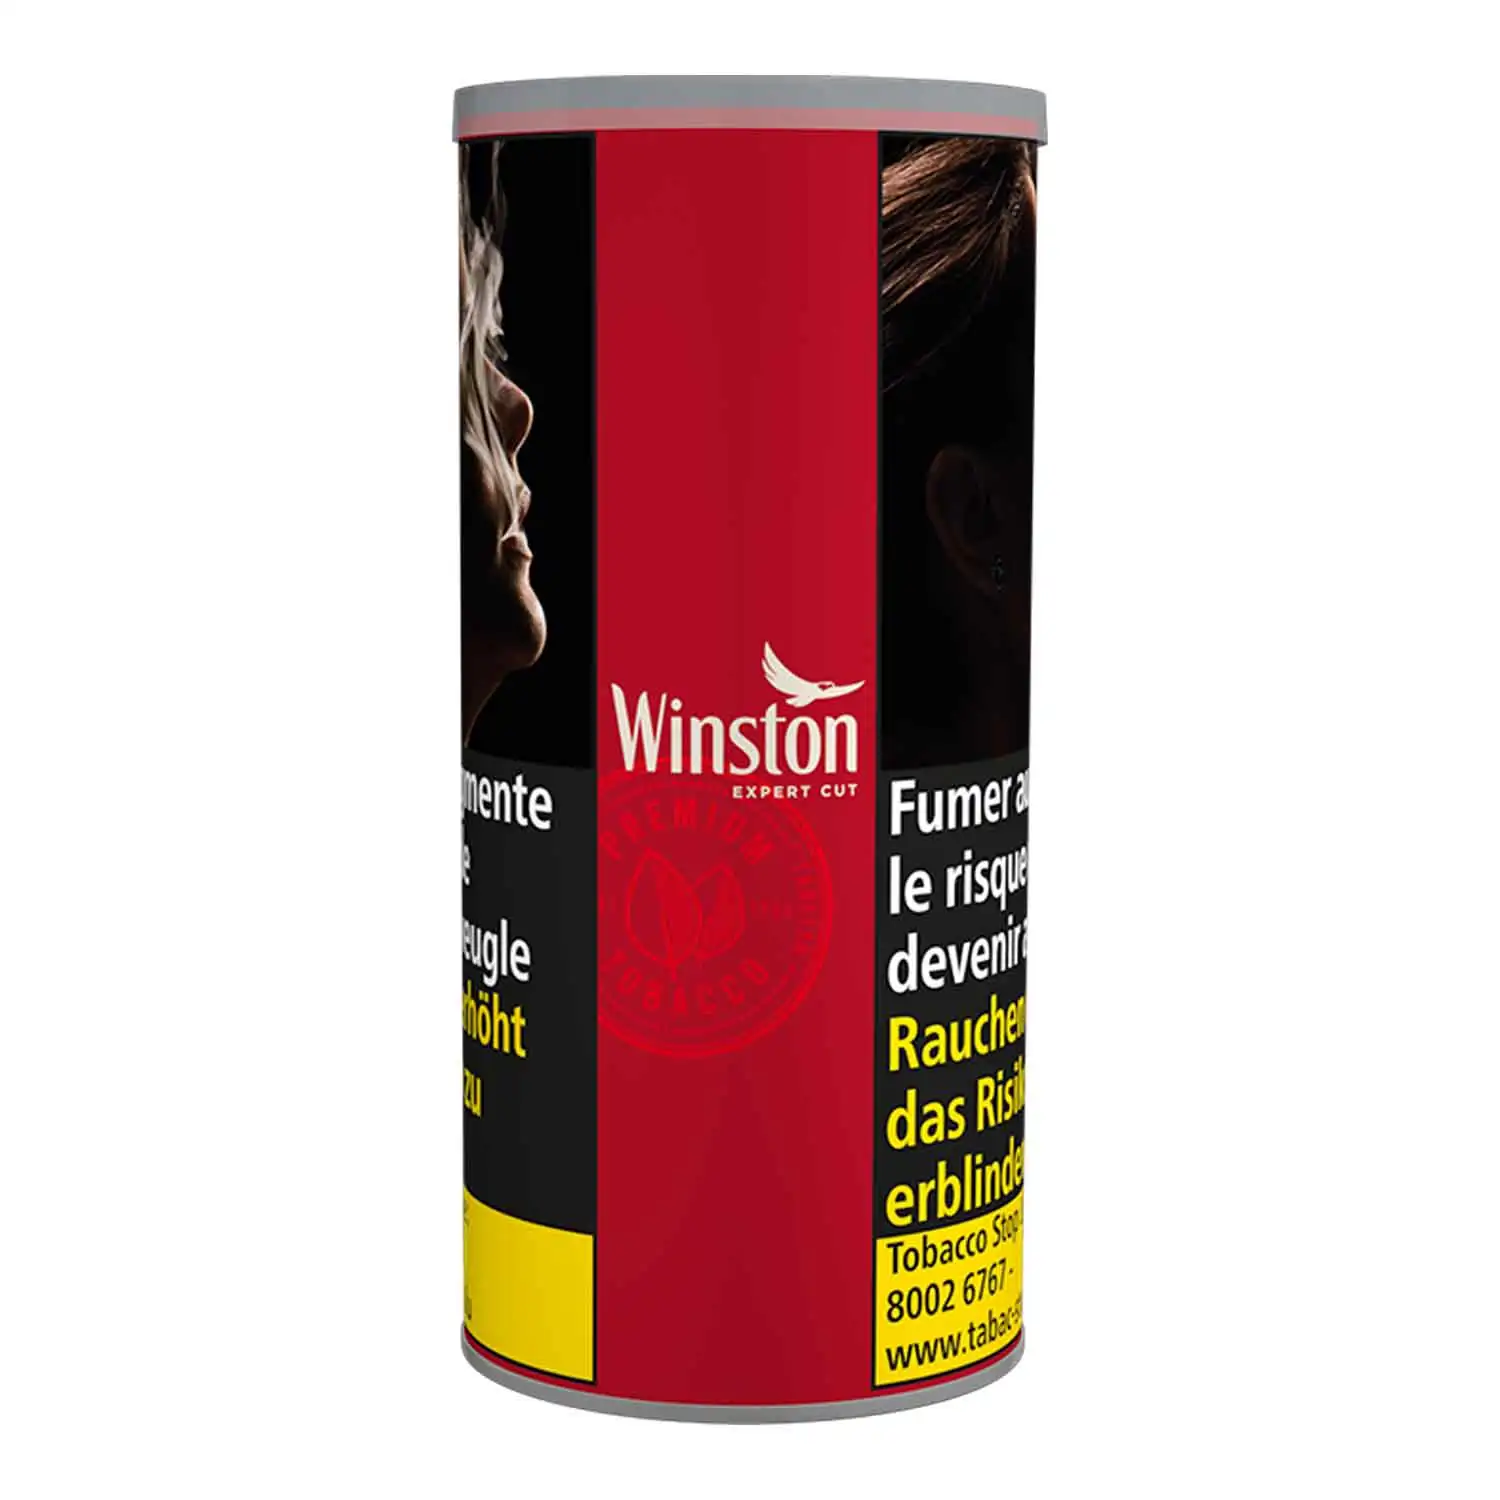 Winston expert red 300g - Buy at Real Tobacco